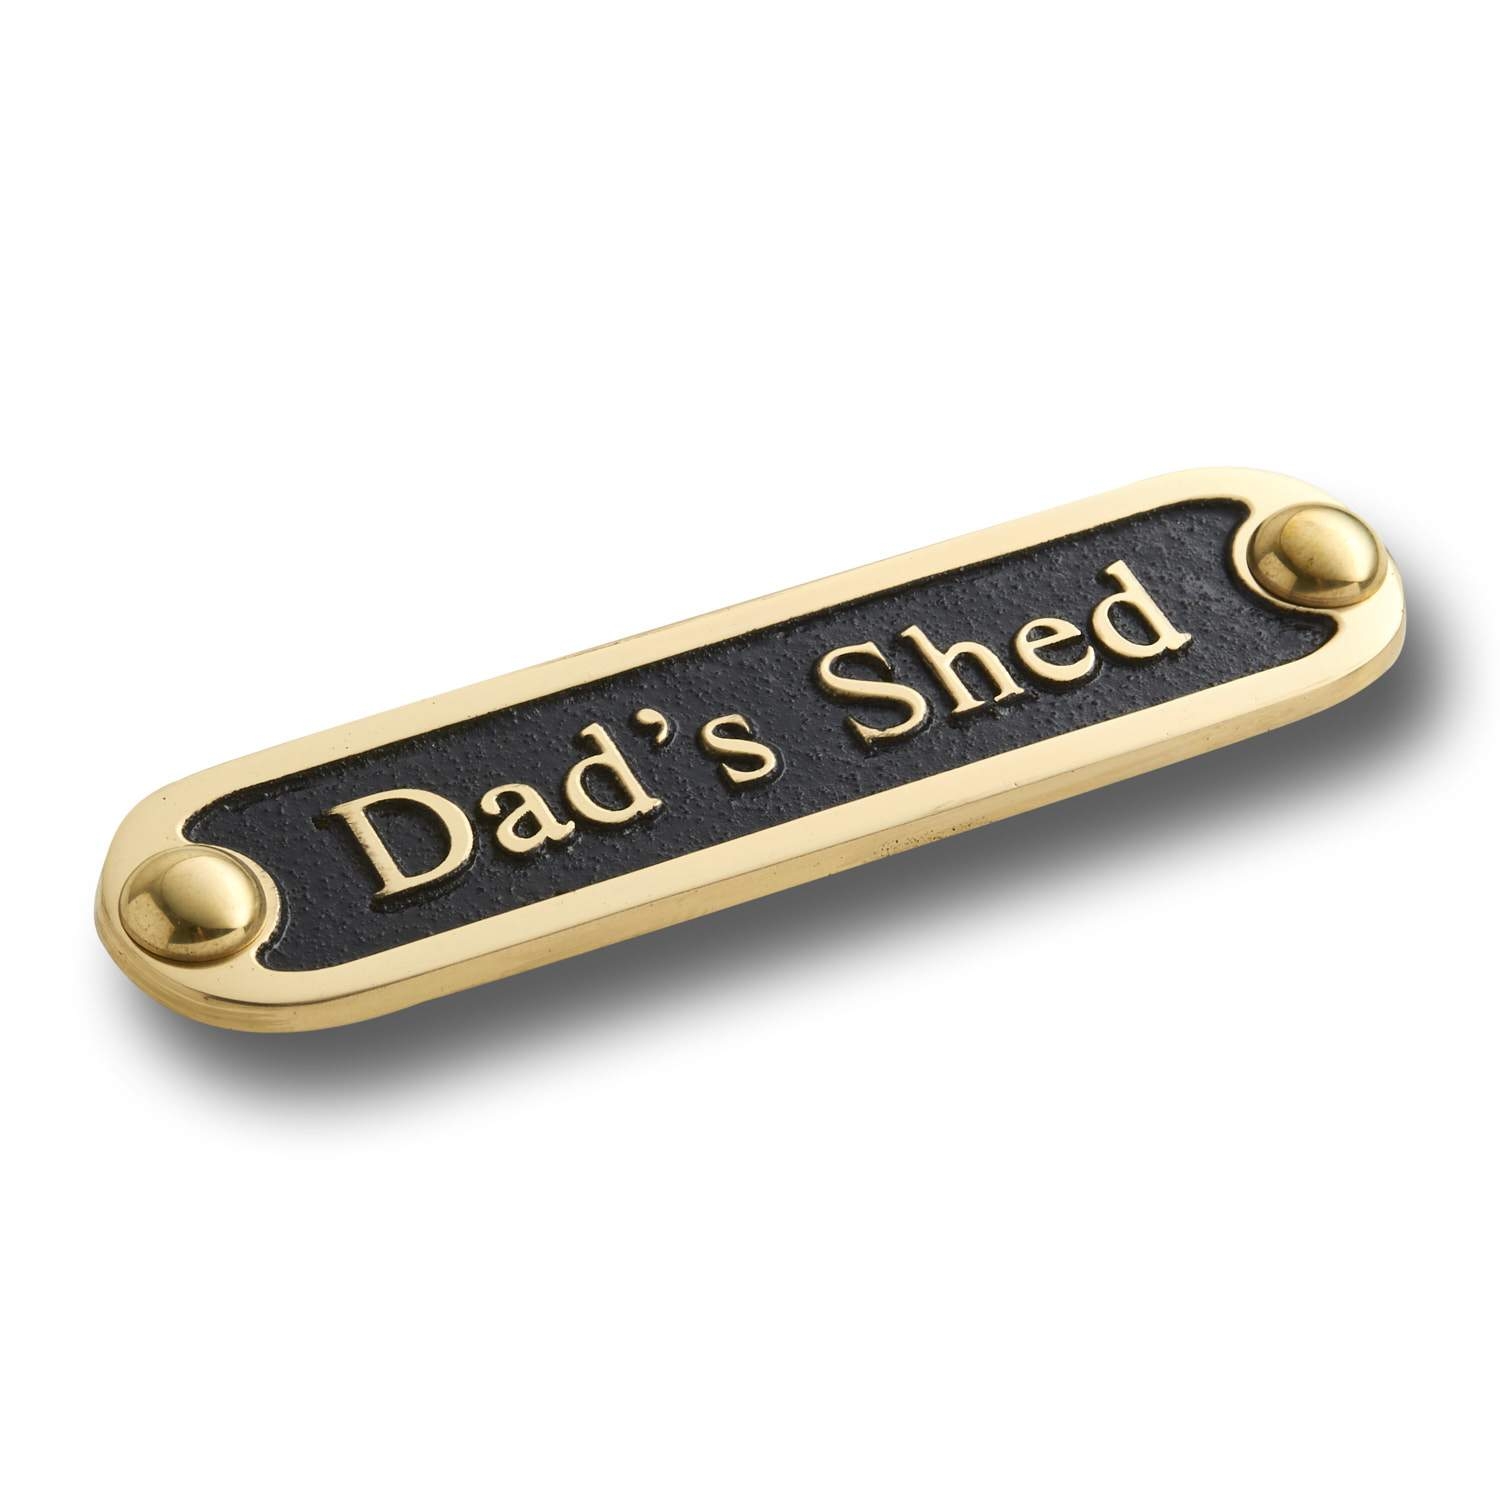 Dad’s Shed Brass Door Sign.  Traditional Style Home Décor Wall Plaque